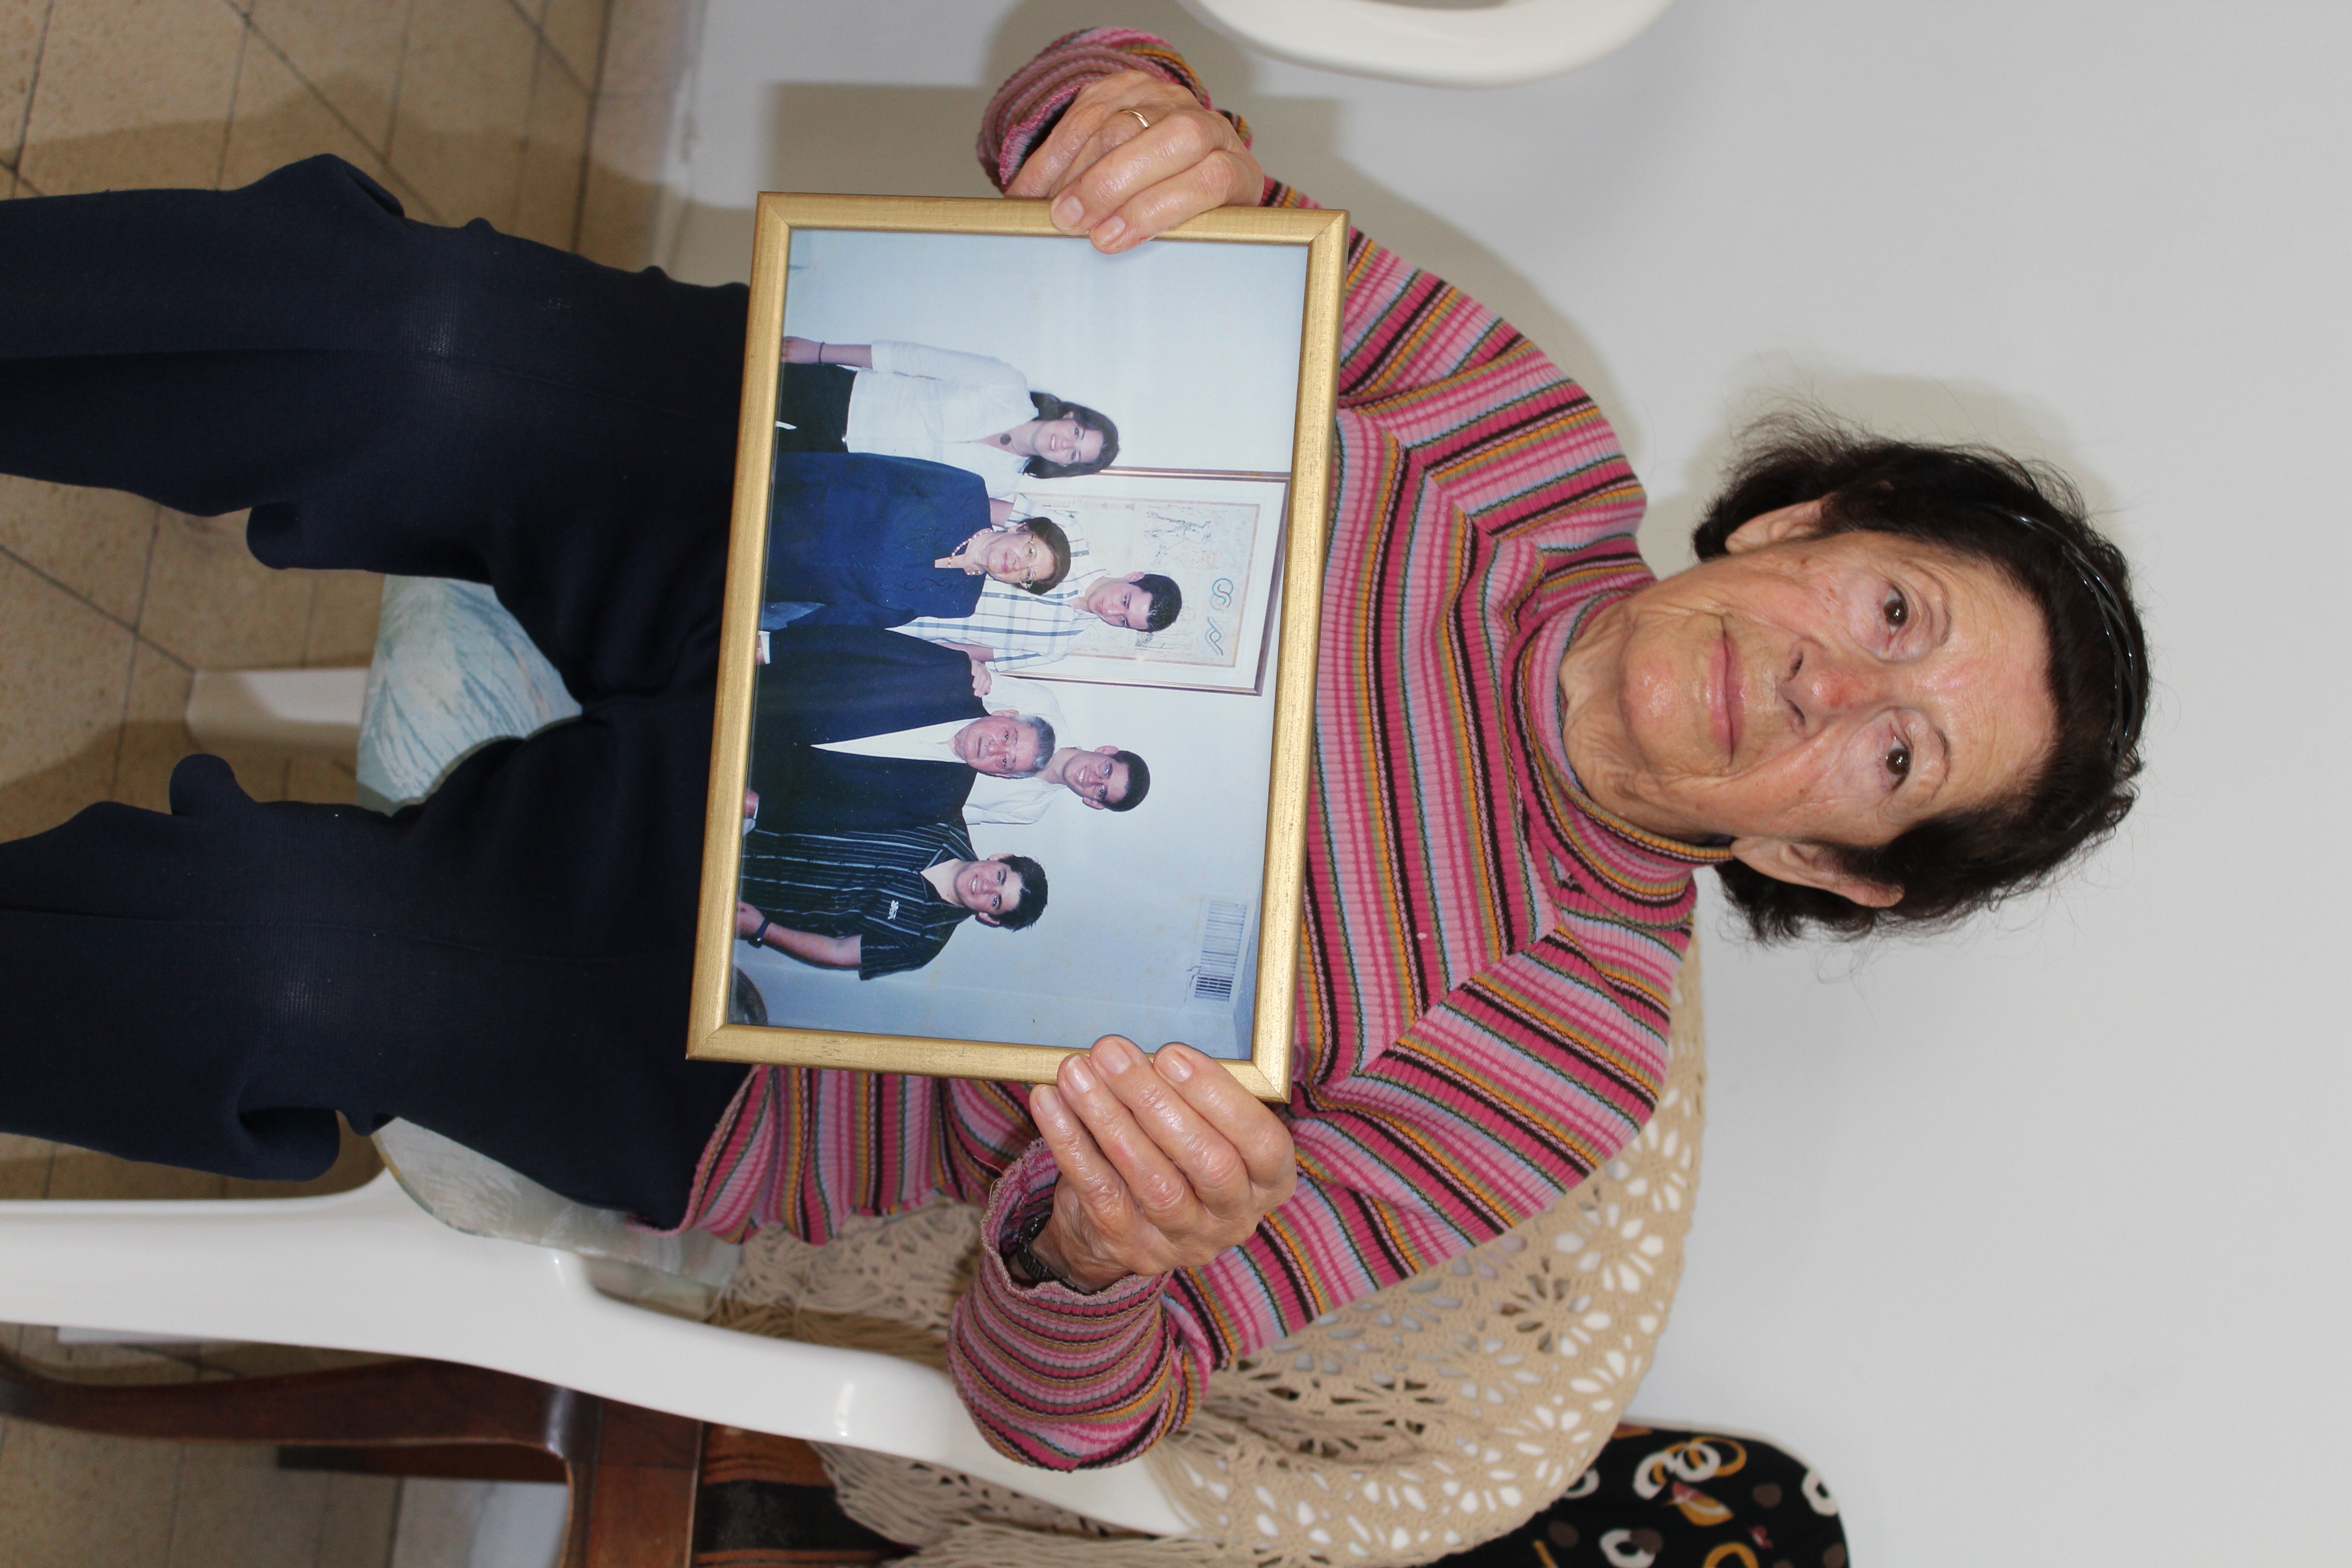 Tel Aviv resident Sylvia Selvas, displaying a photo of her late husband and their four grandchildren, hoped to locate her long-lost friend from their native Greece. (Hillel Kuttler)